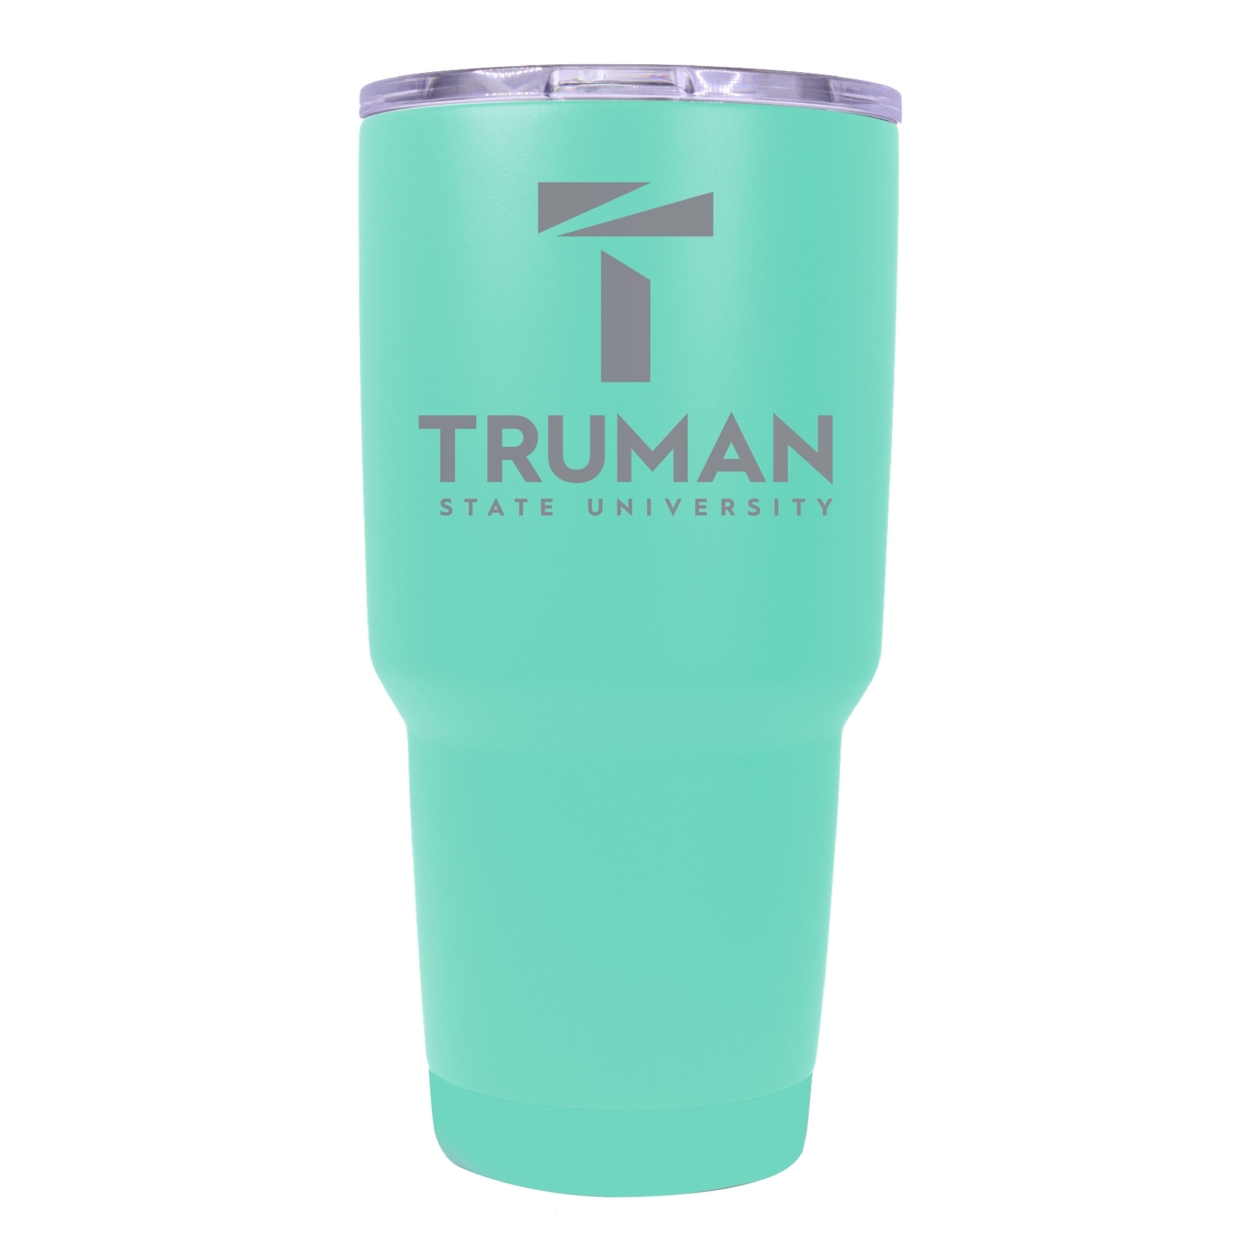 Truman State University 24 Oz Laser Engraved Stainless Steel Insulated Tumbler - Choose Your Color. - Seafoam